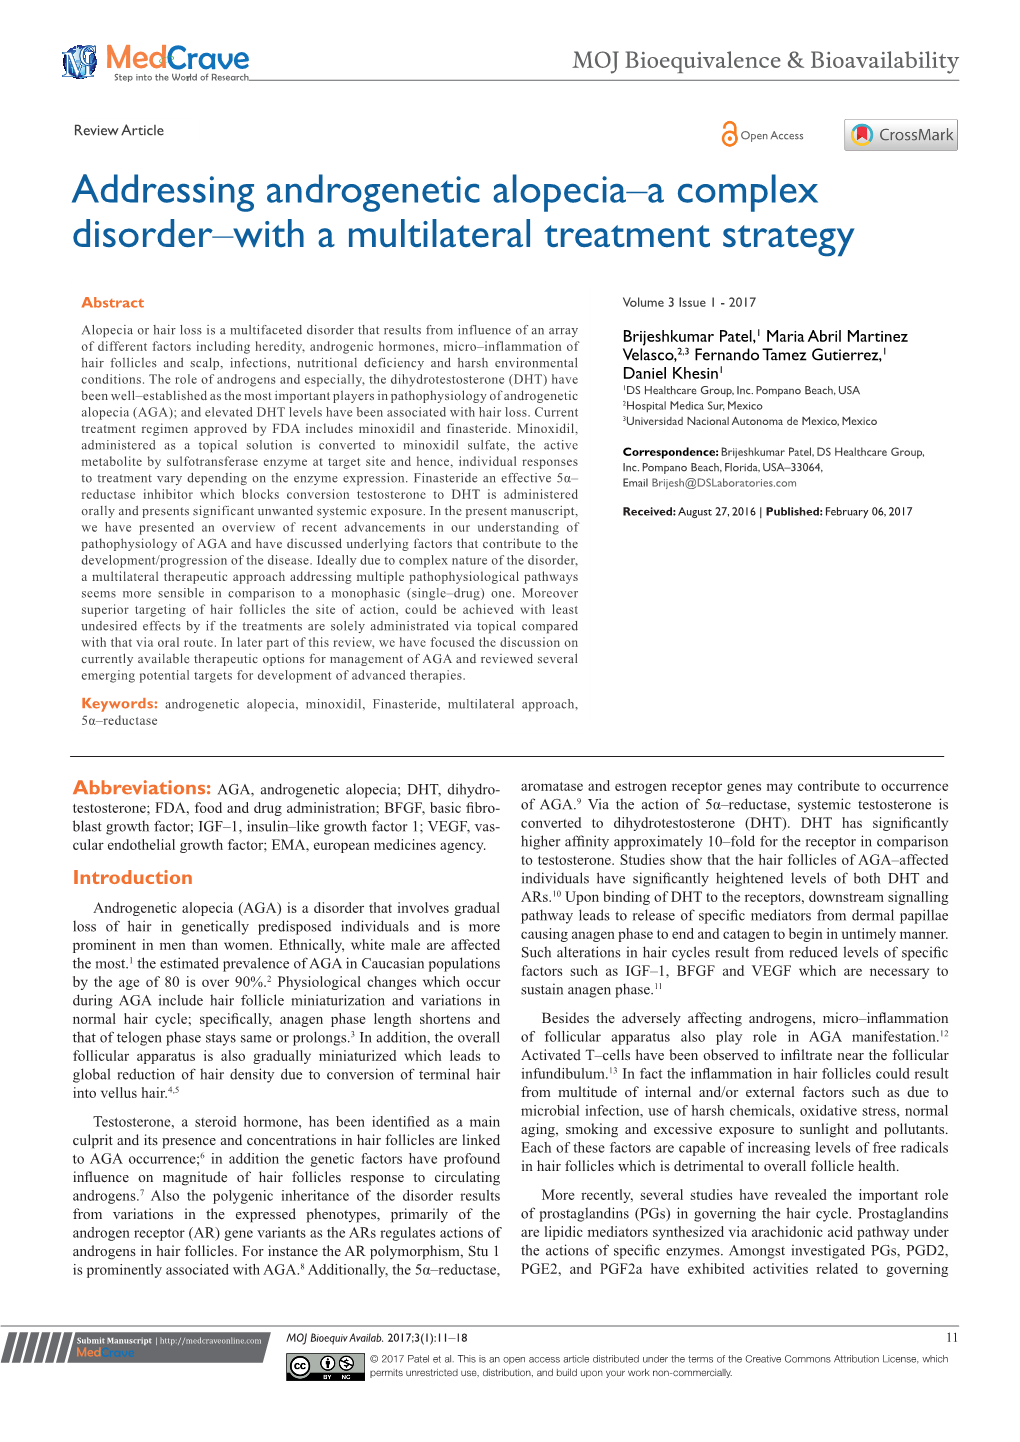 Addressing Androgenetic Alopecia‒A Complex Disorder‒With a Multilateral Treatment Strategy